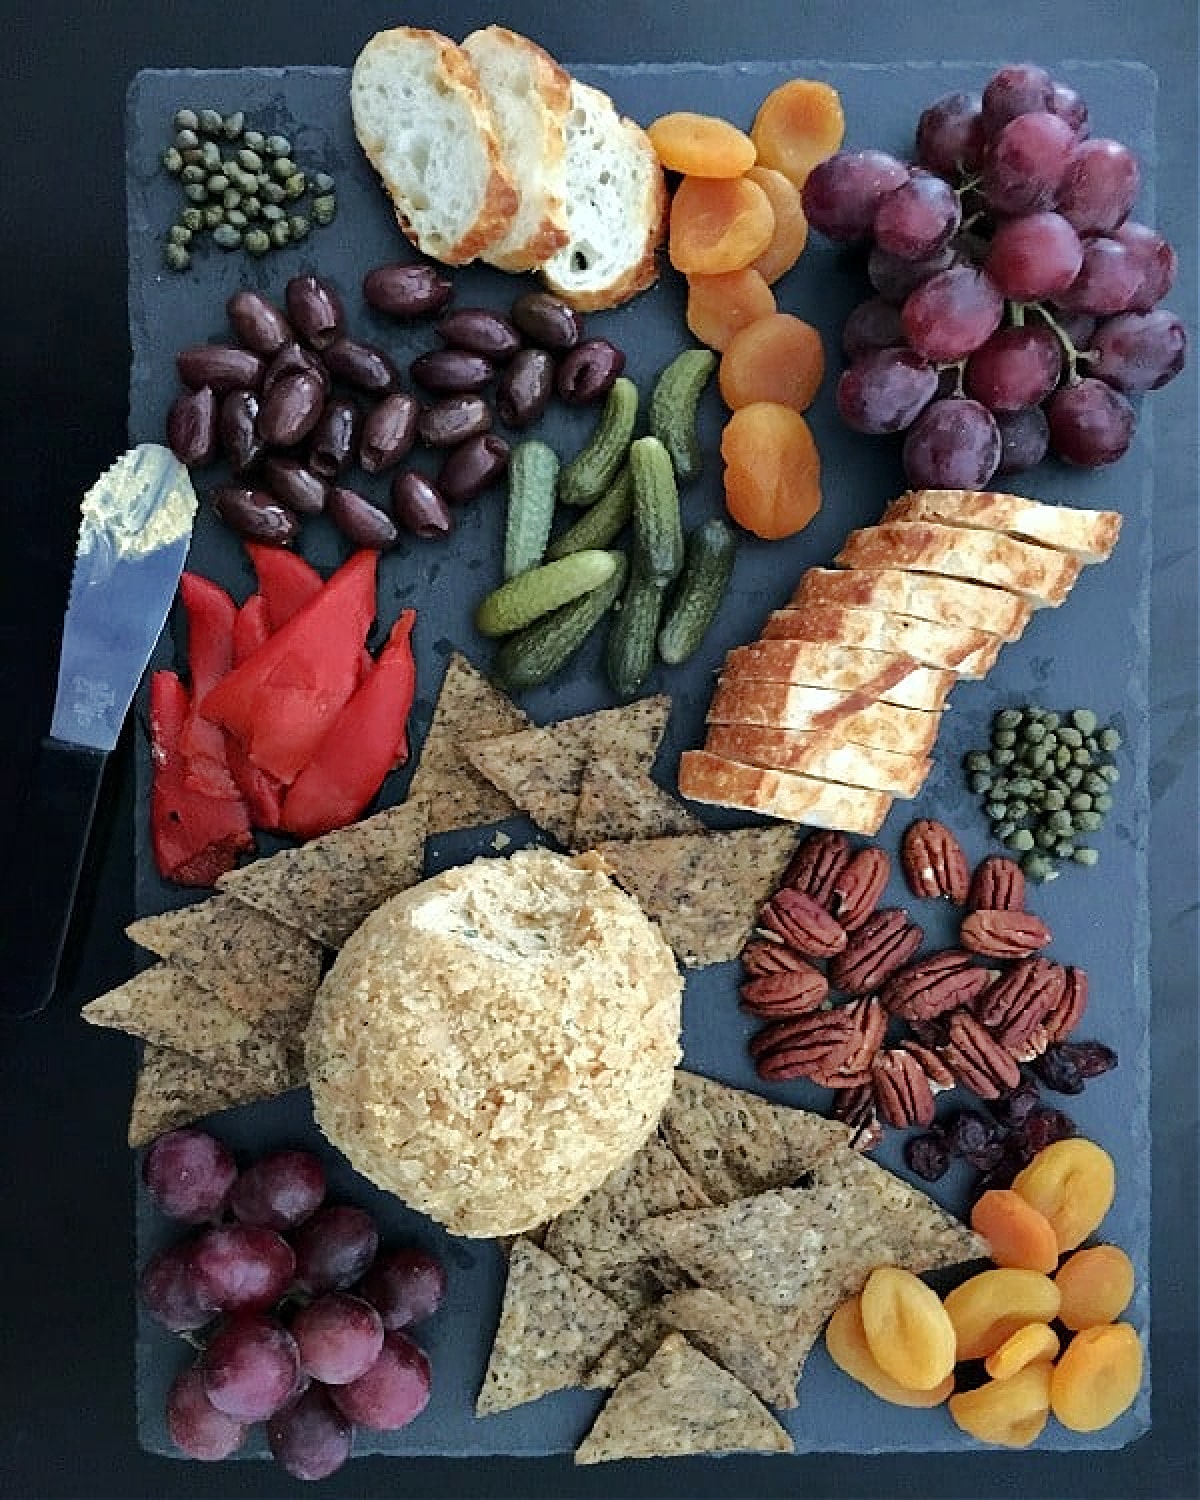 Overhead view of a golden brown colored spiced pumpkin basil cheese ball on a black slate board with crackers, pecans, capers, sliced baguette, purple grapes, cornichon pickles, and olives.